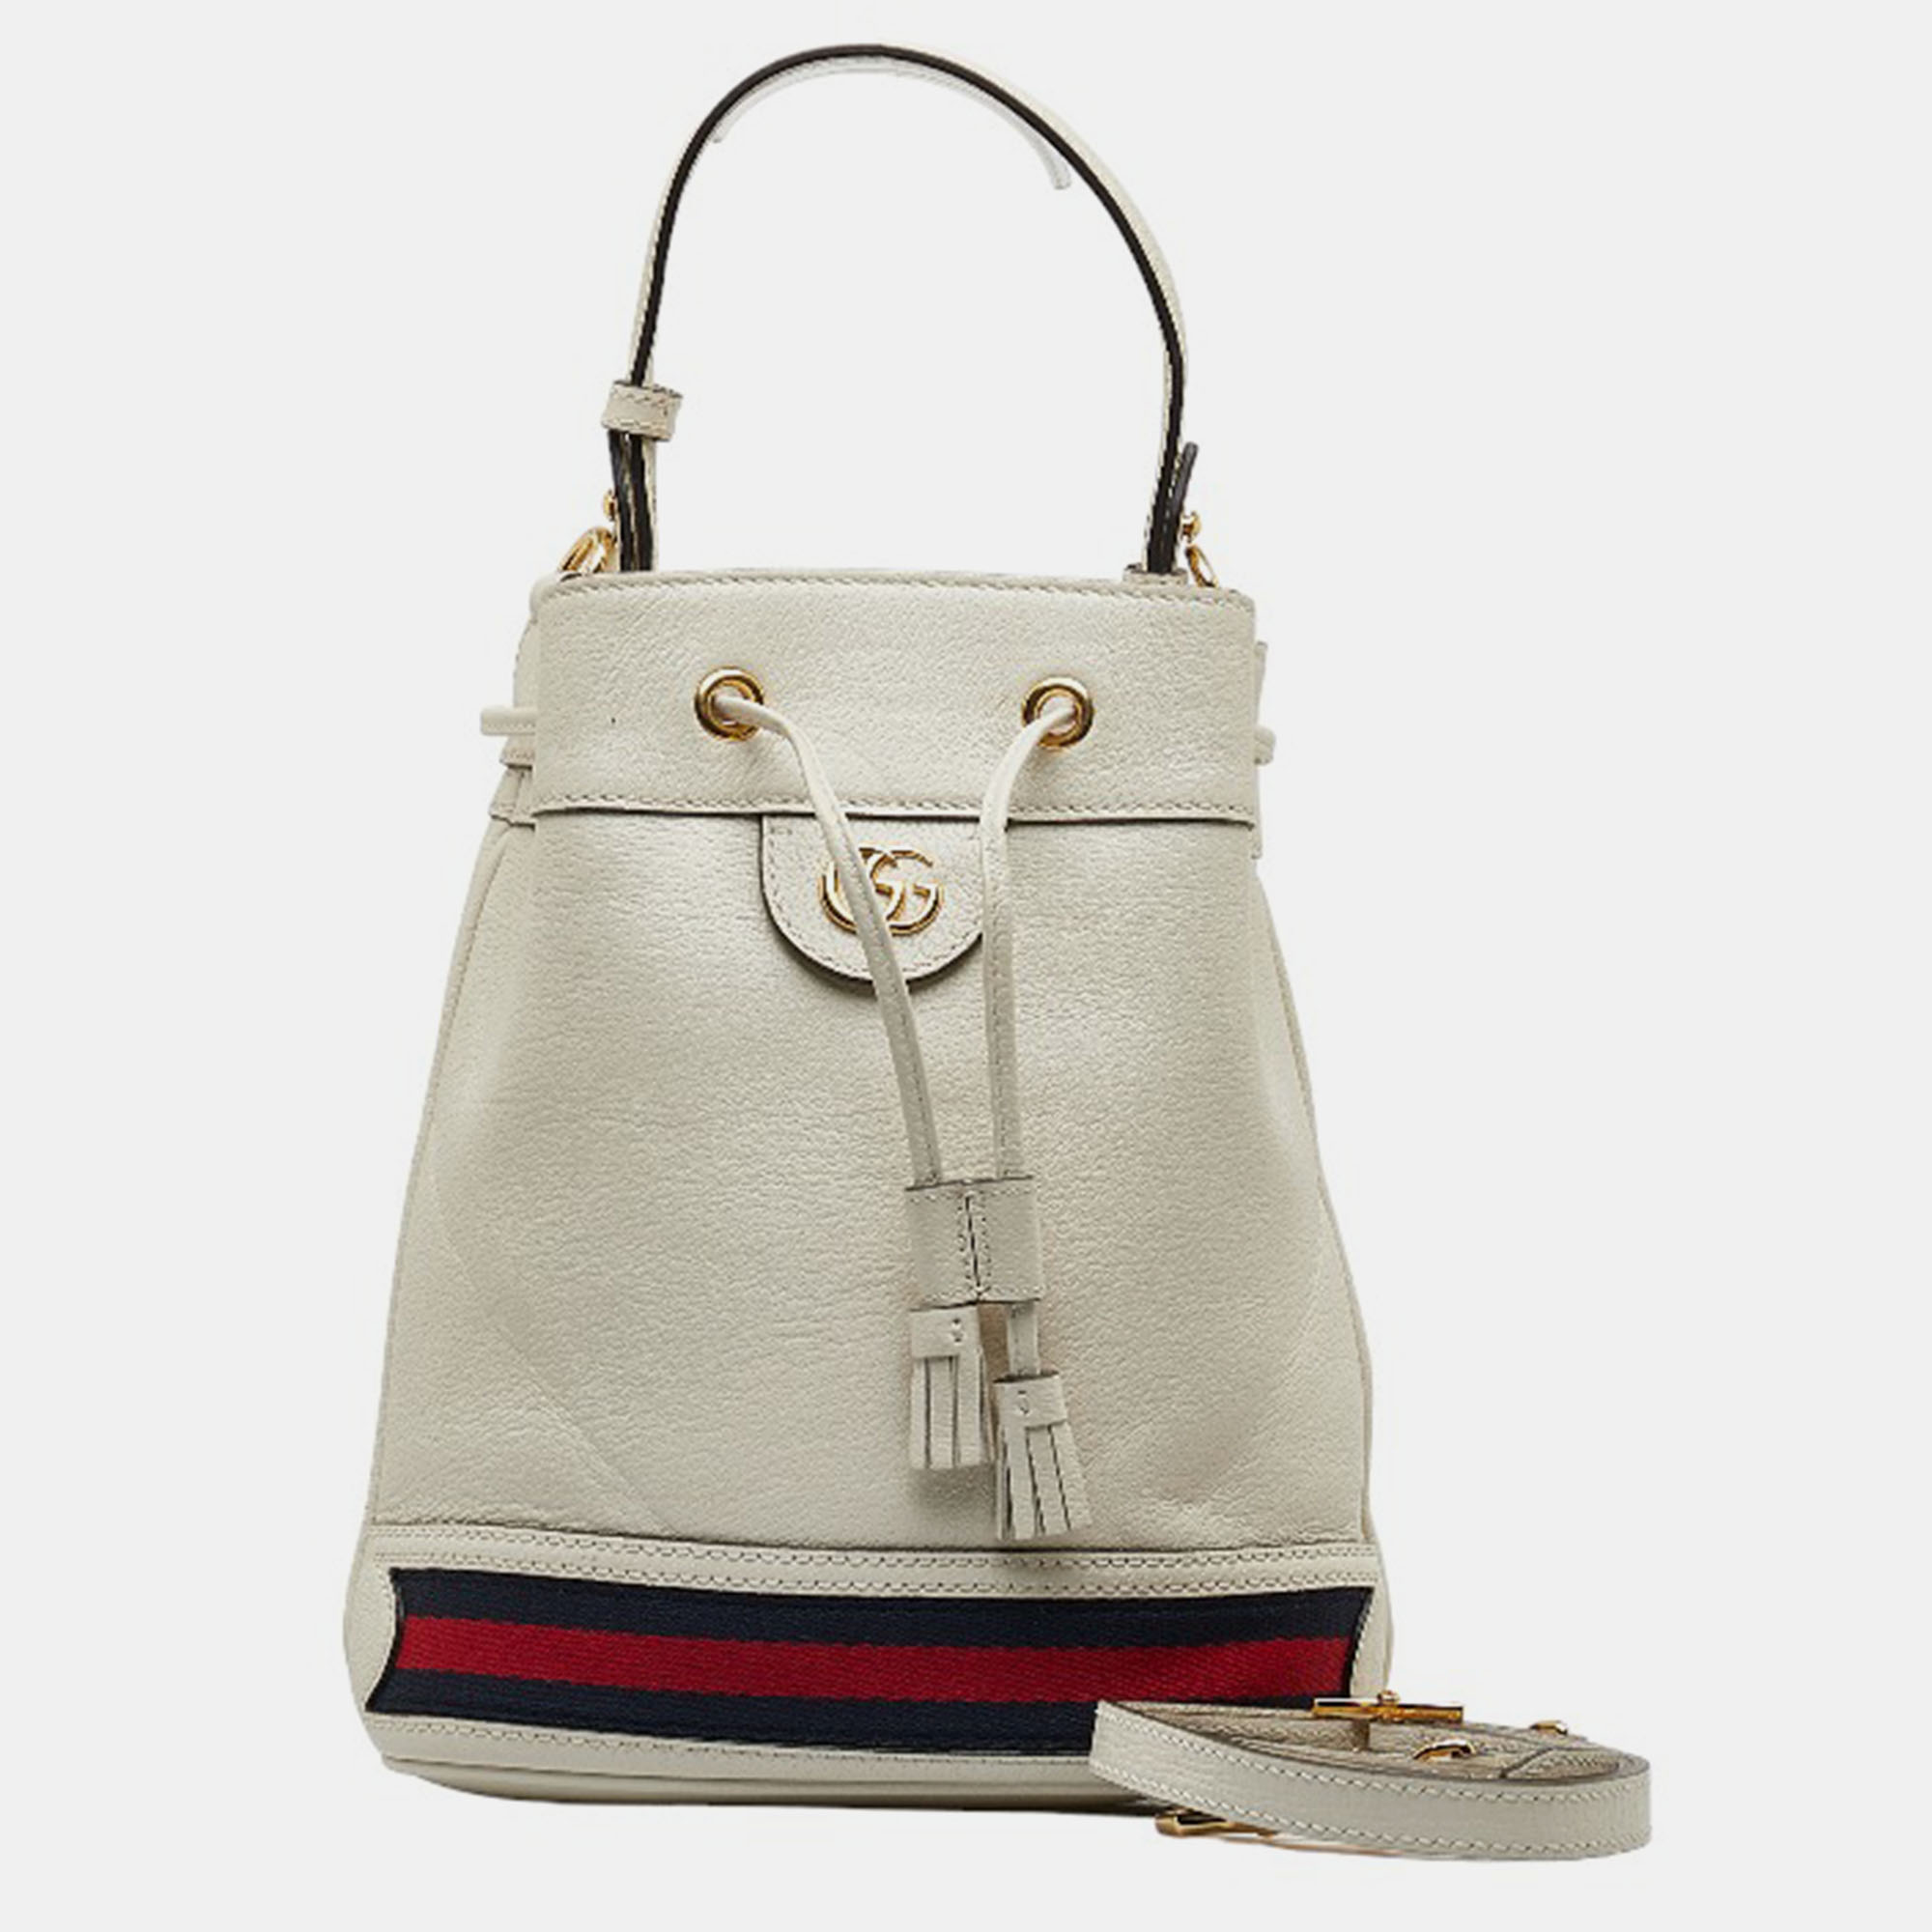 Gucci white ophidia small bucket bag